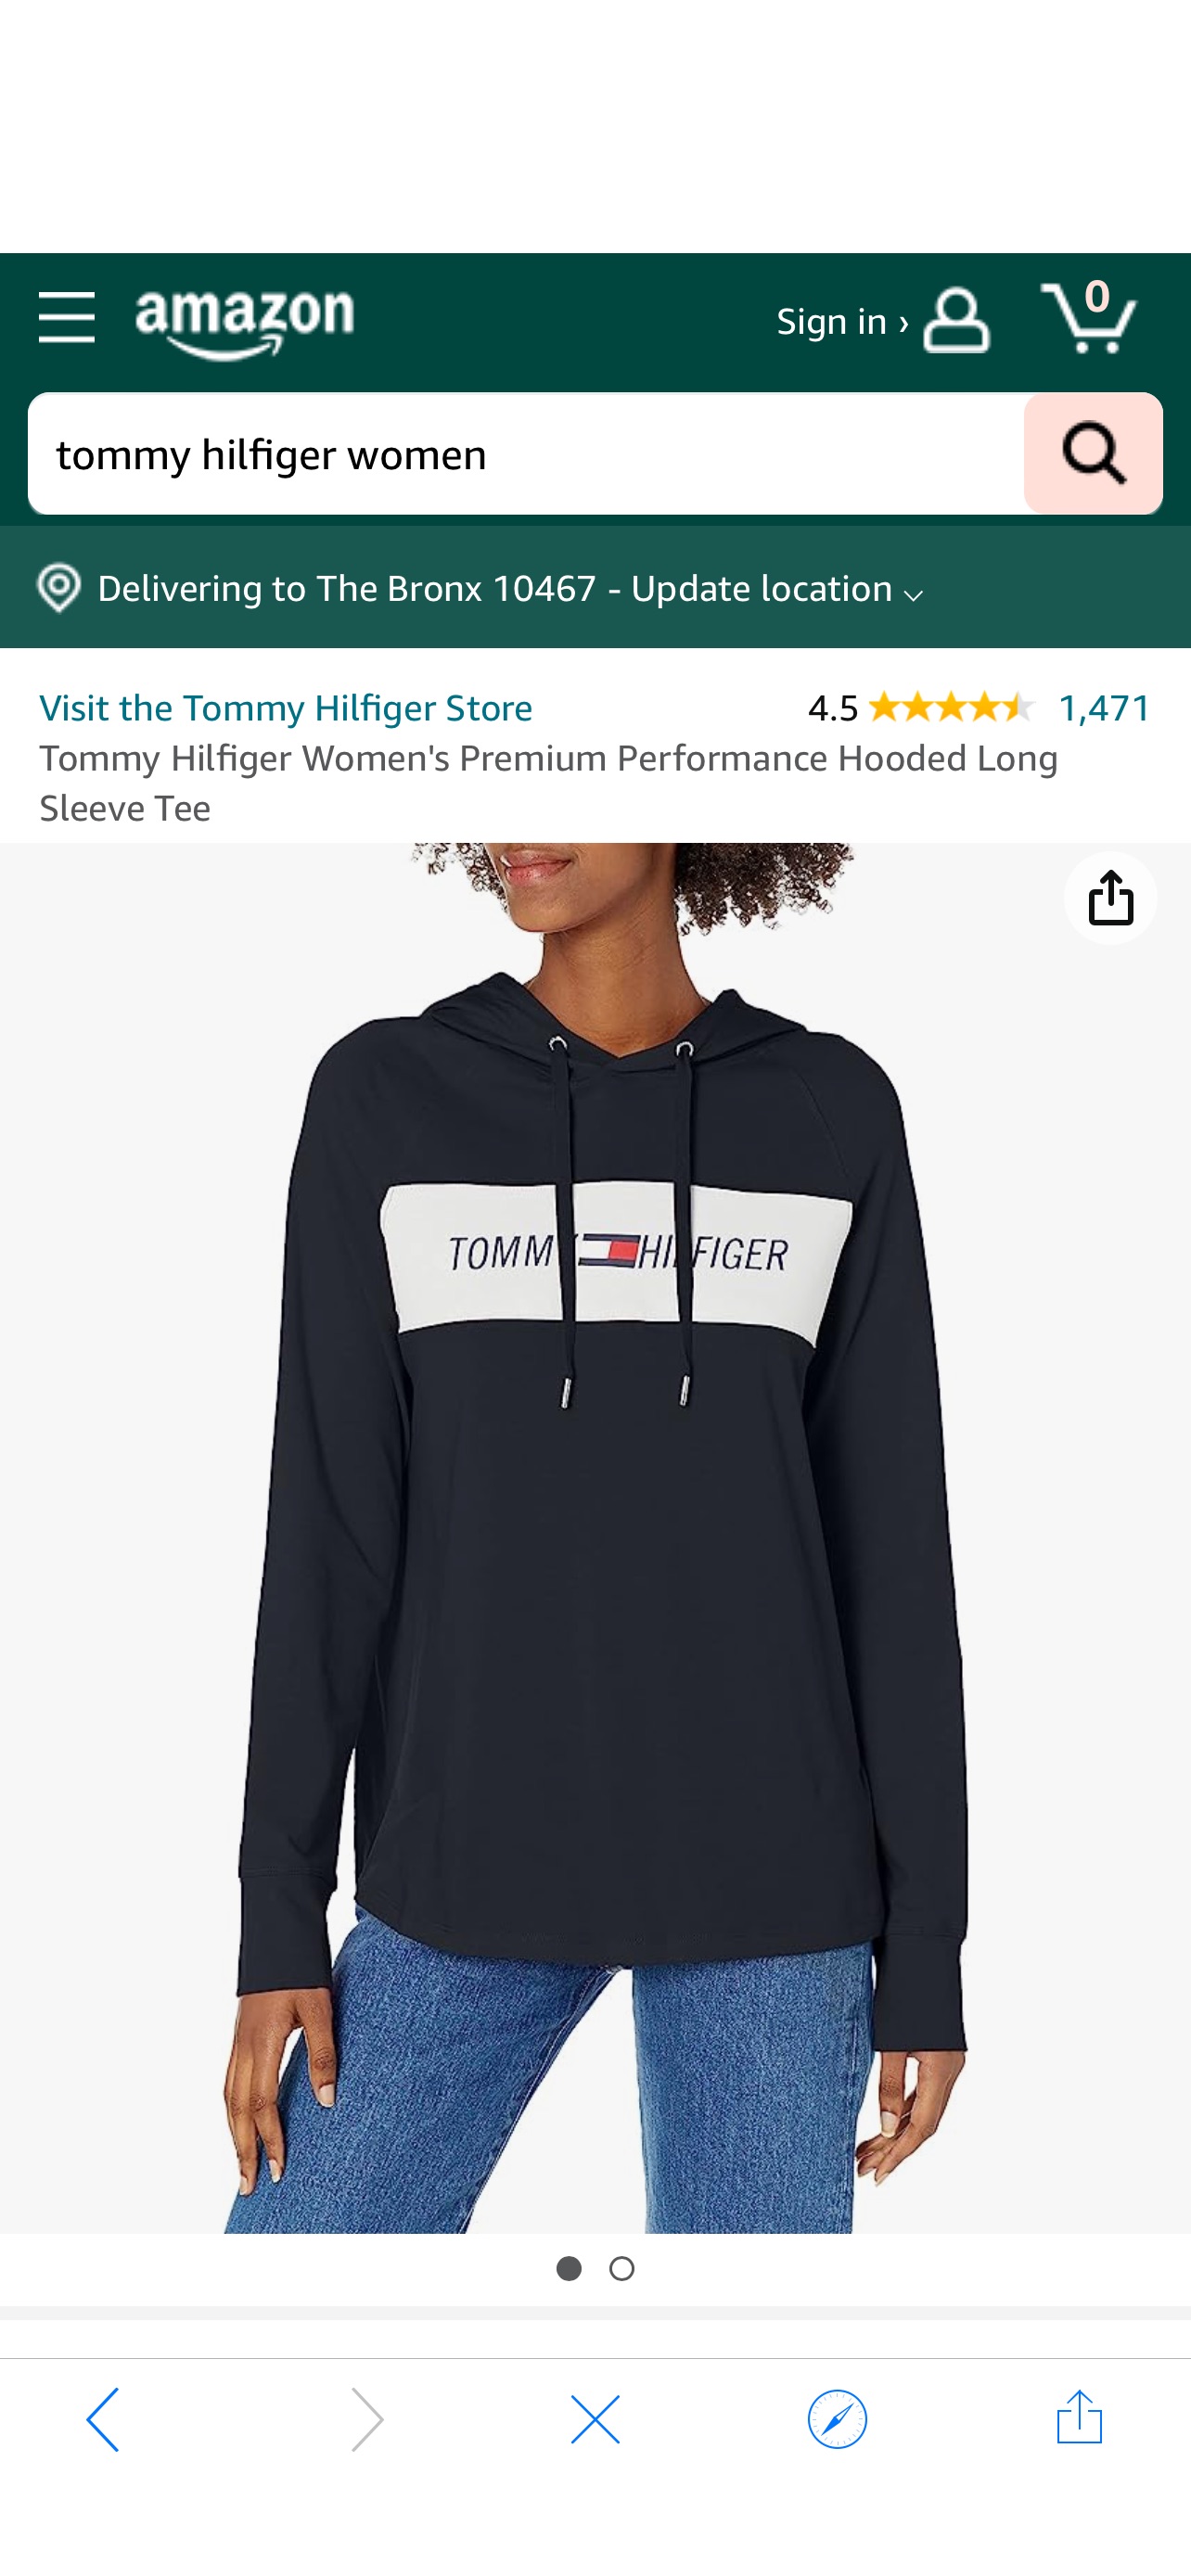 Tommy Hilfiger Performance Long Sleeve Hoodie – Pullover Sweaters for Women with Adjustable Drawstring Hood, Classic Navy, Medium at Amazon Women’s Clothing store